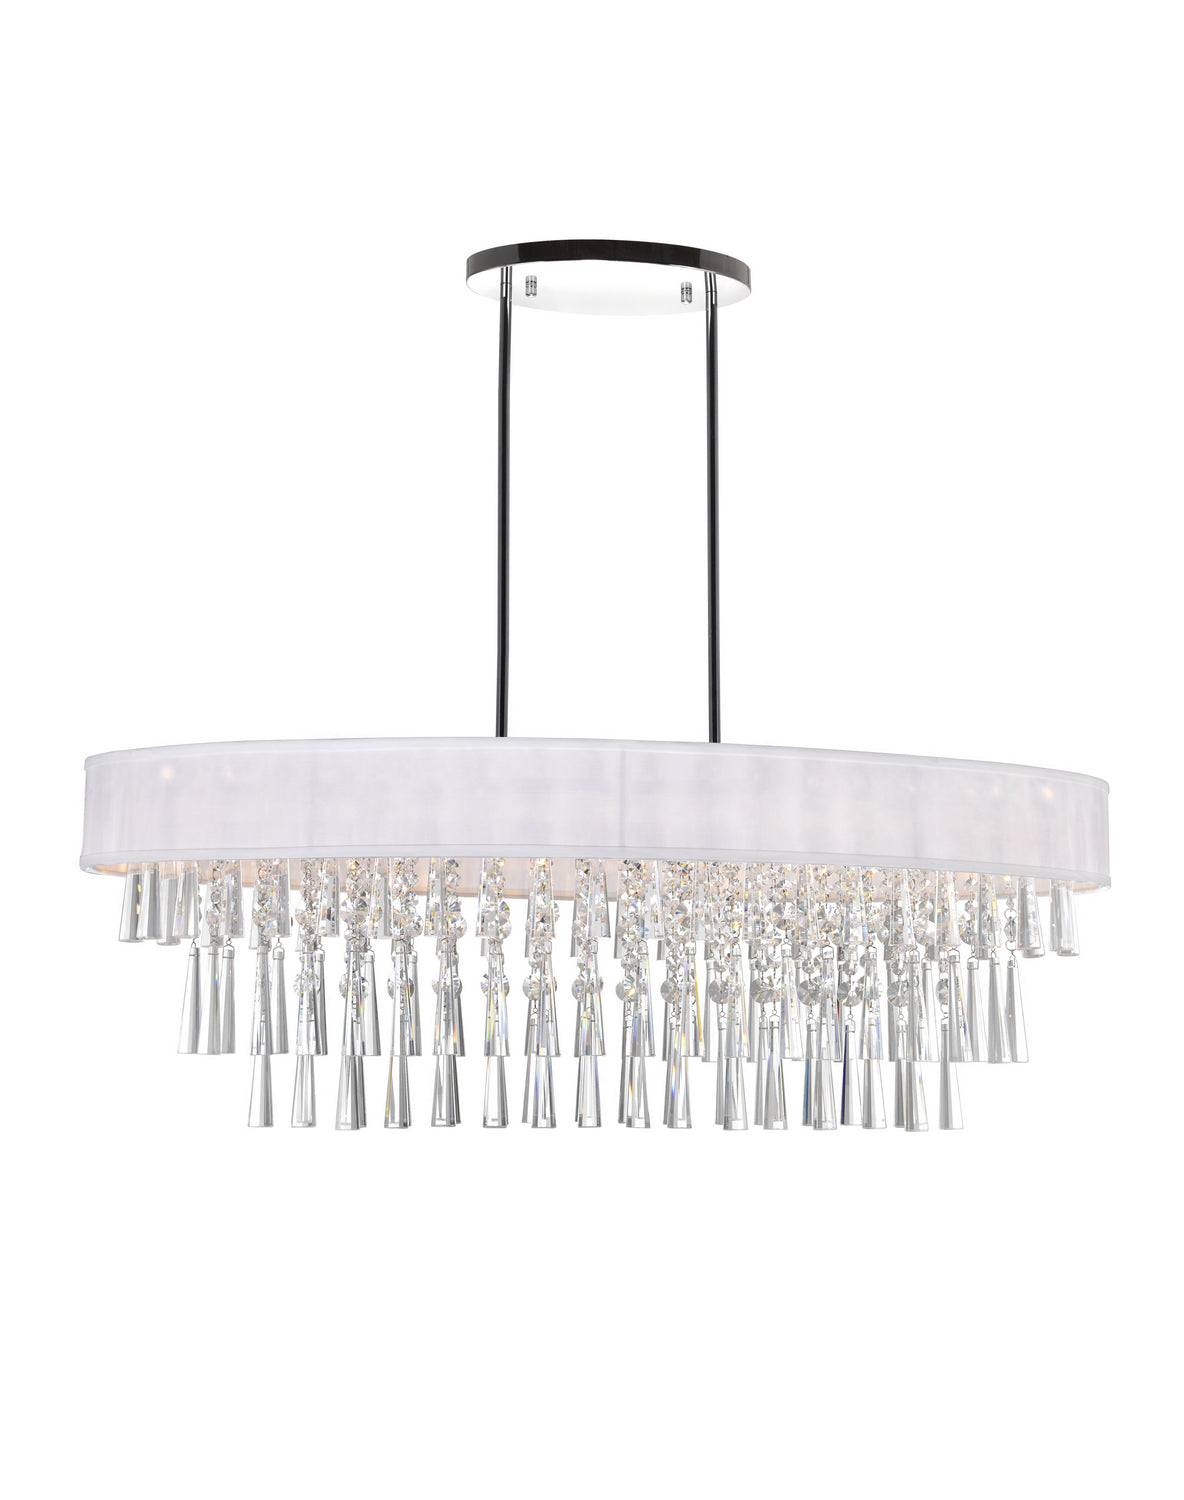 CWI Lighting Eight Light Chandelier from the Franca collection in Off White finish